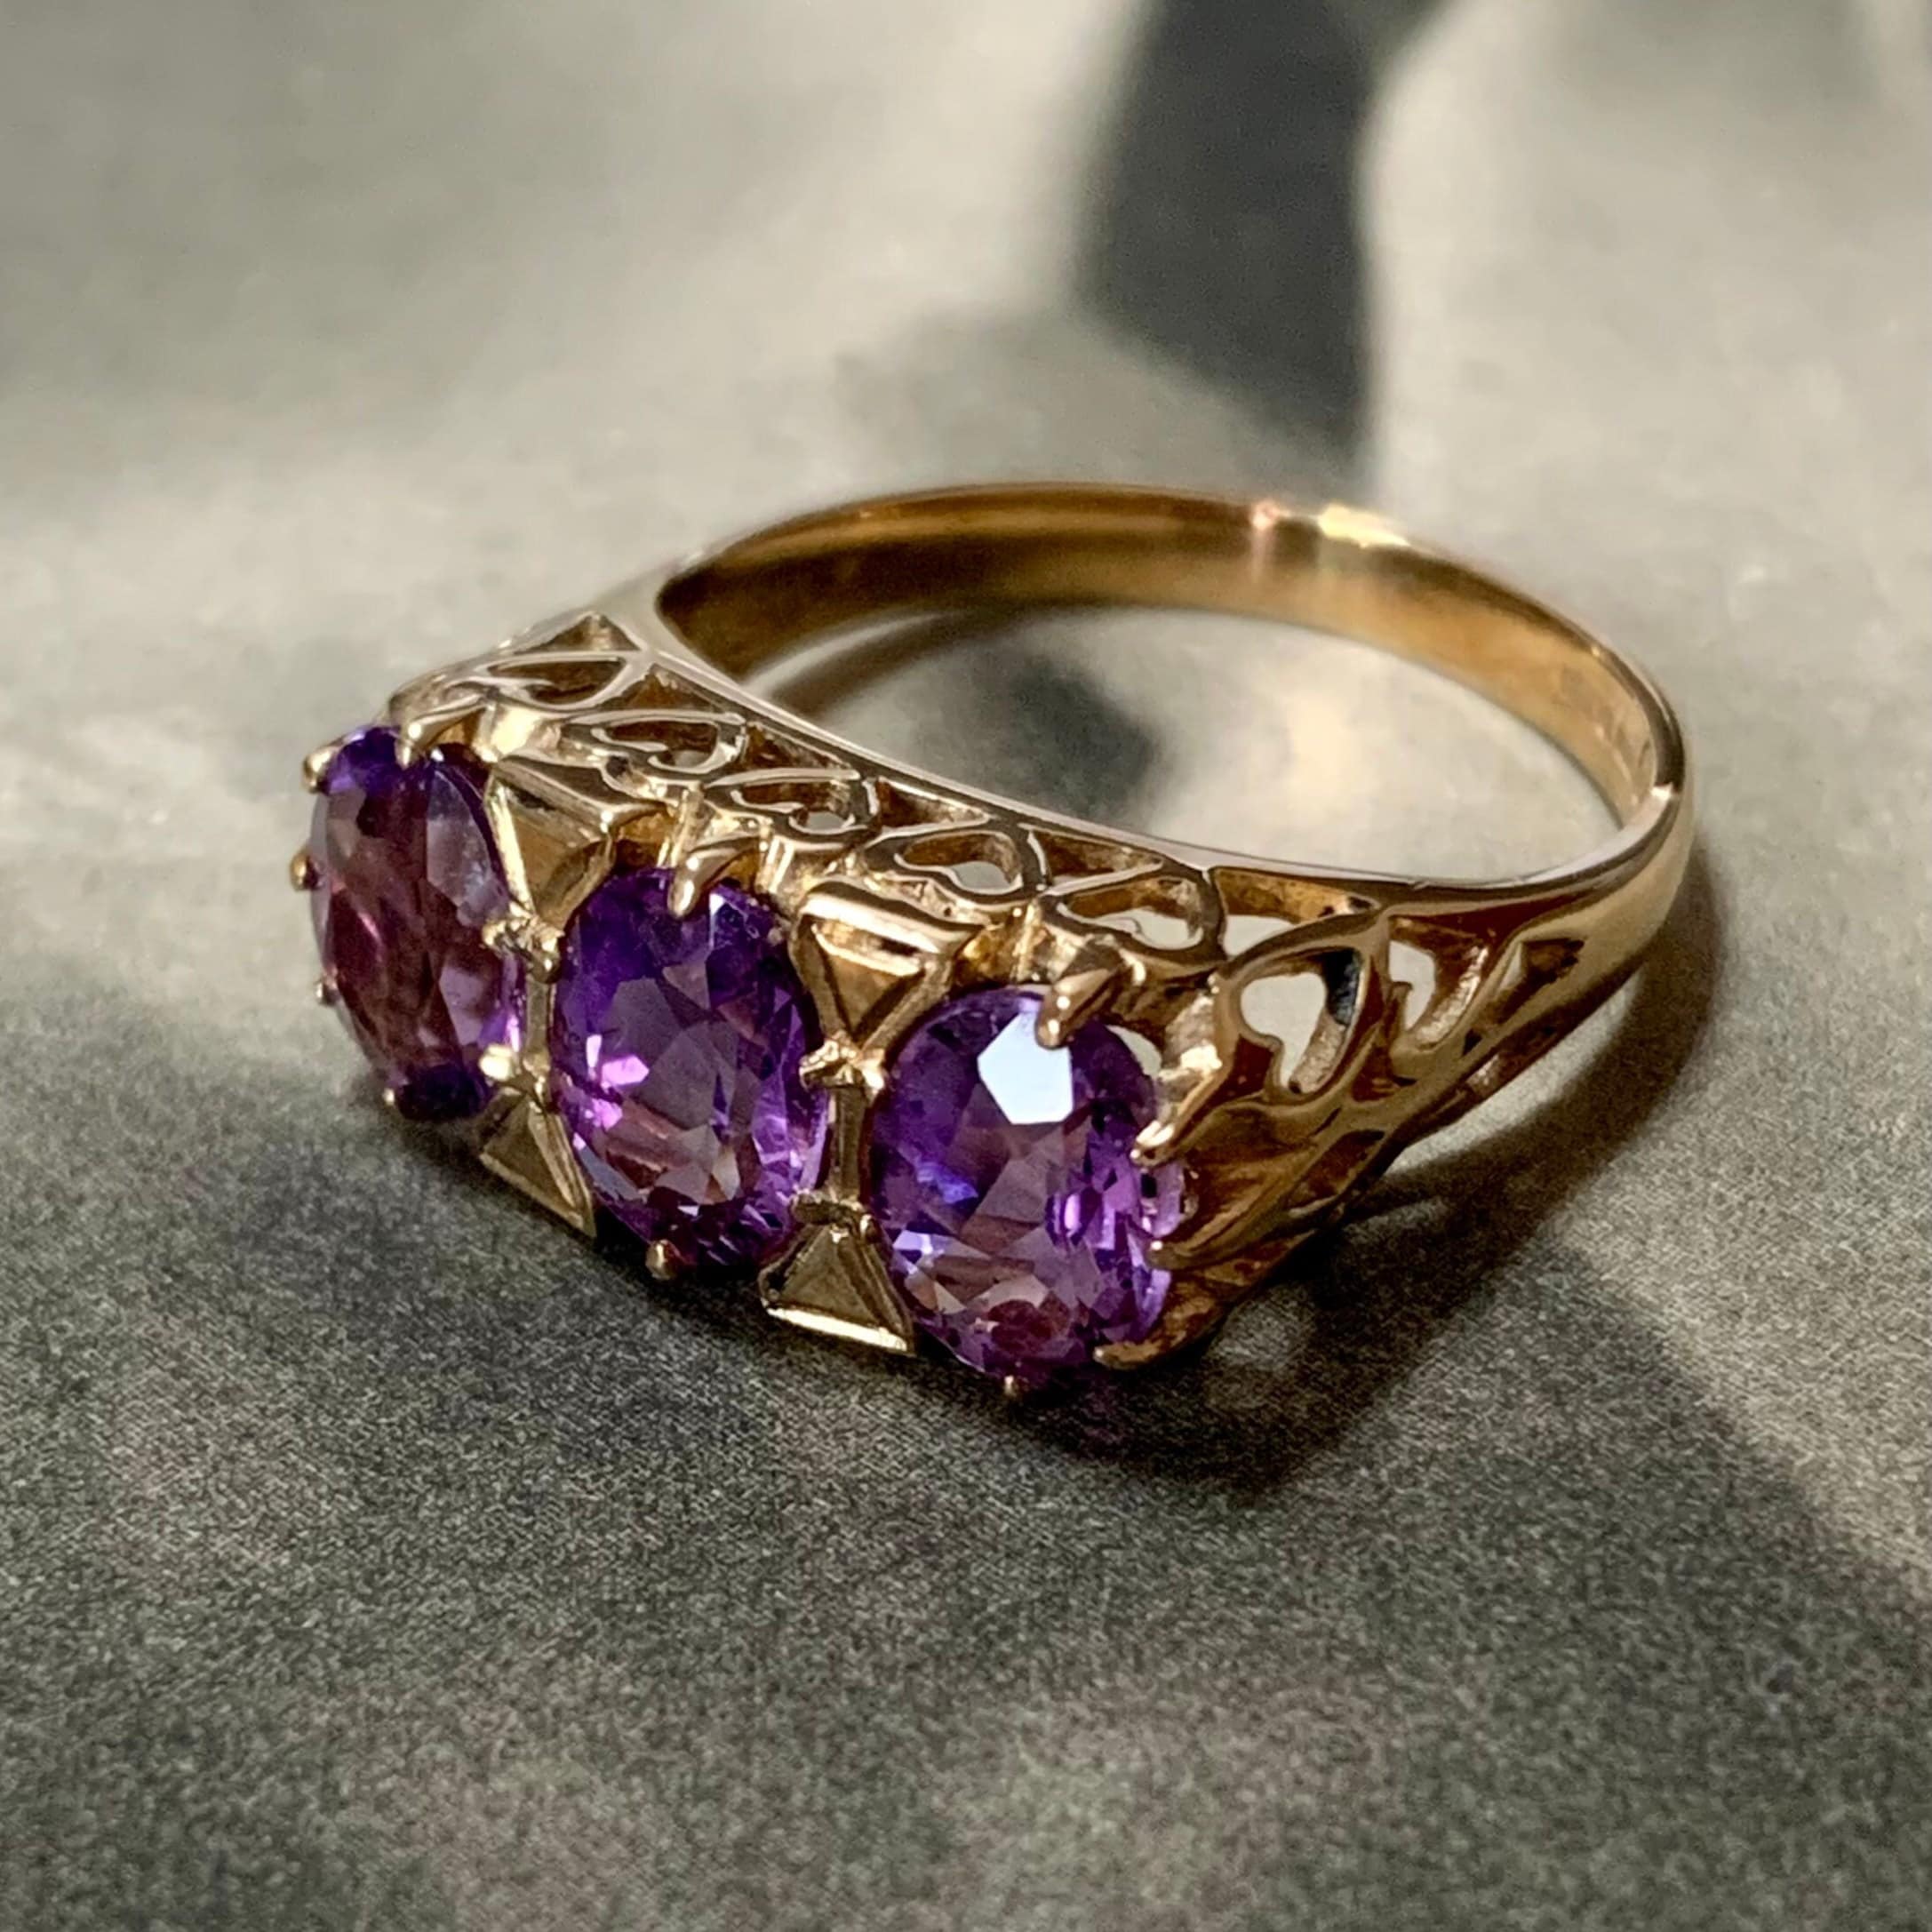 Its A Beauty Amethyst Trilogy Ring Set in 9Ct Yellow Gold. Full English Hallmark & Finger Size L1/2 | UK 5 7/8 | Us